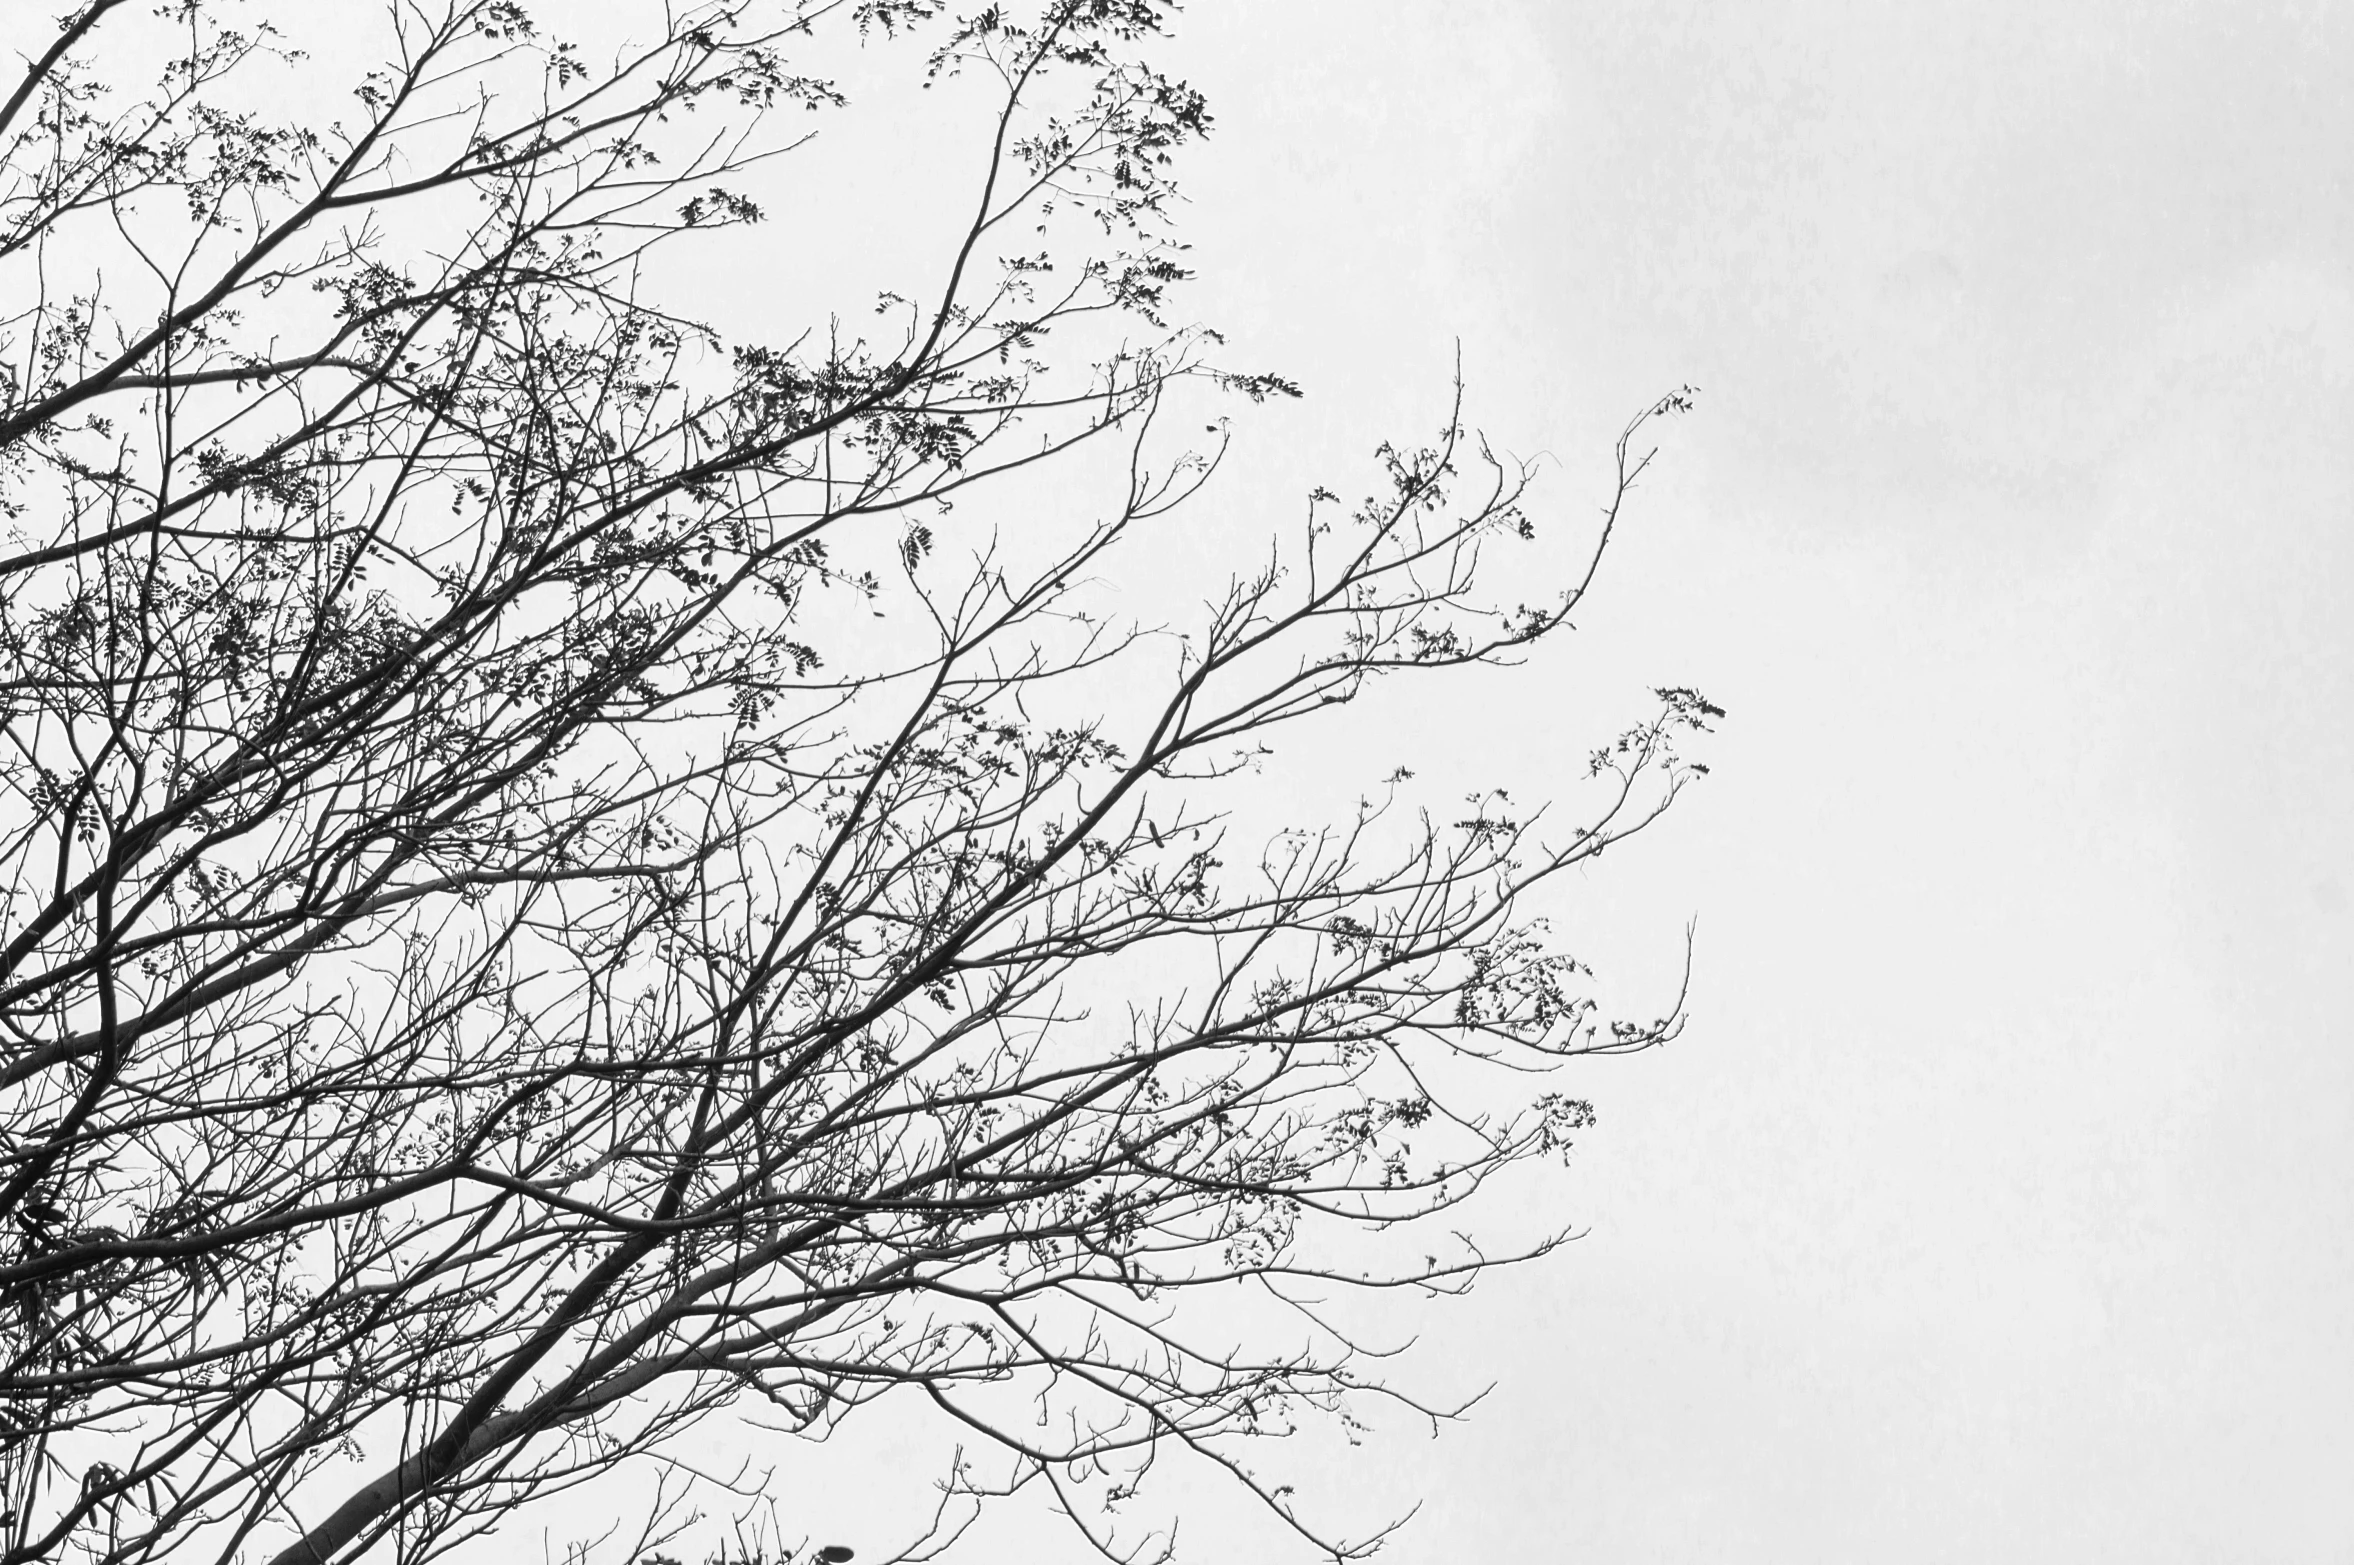 birds sitting in the tree tops on a cloudy day